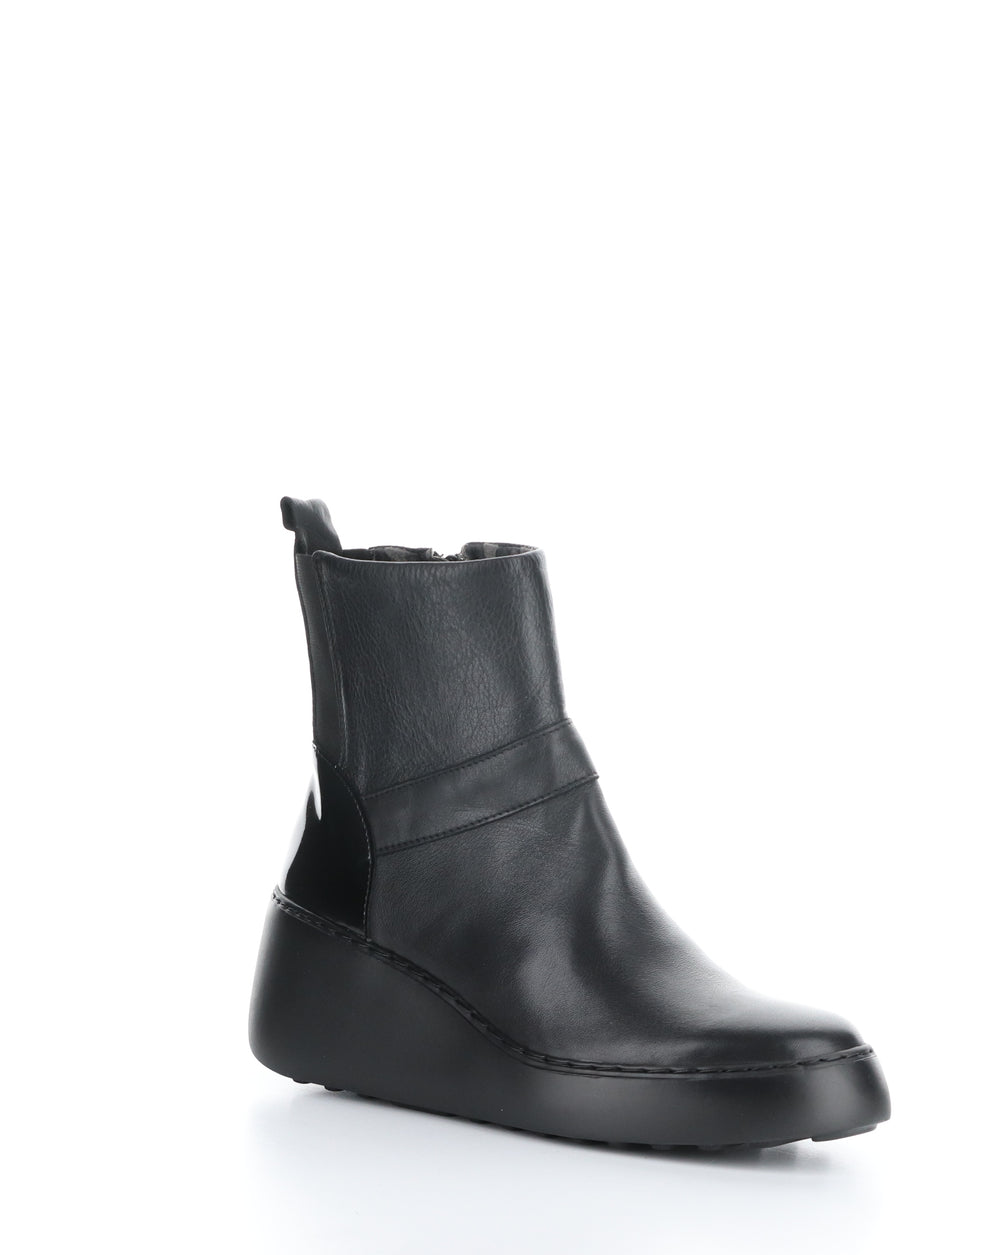 DOXE604FLY 000 BLACK Elasticated Boots